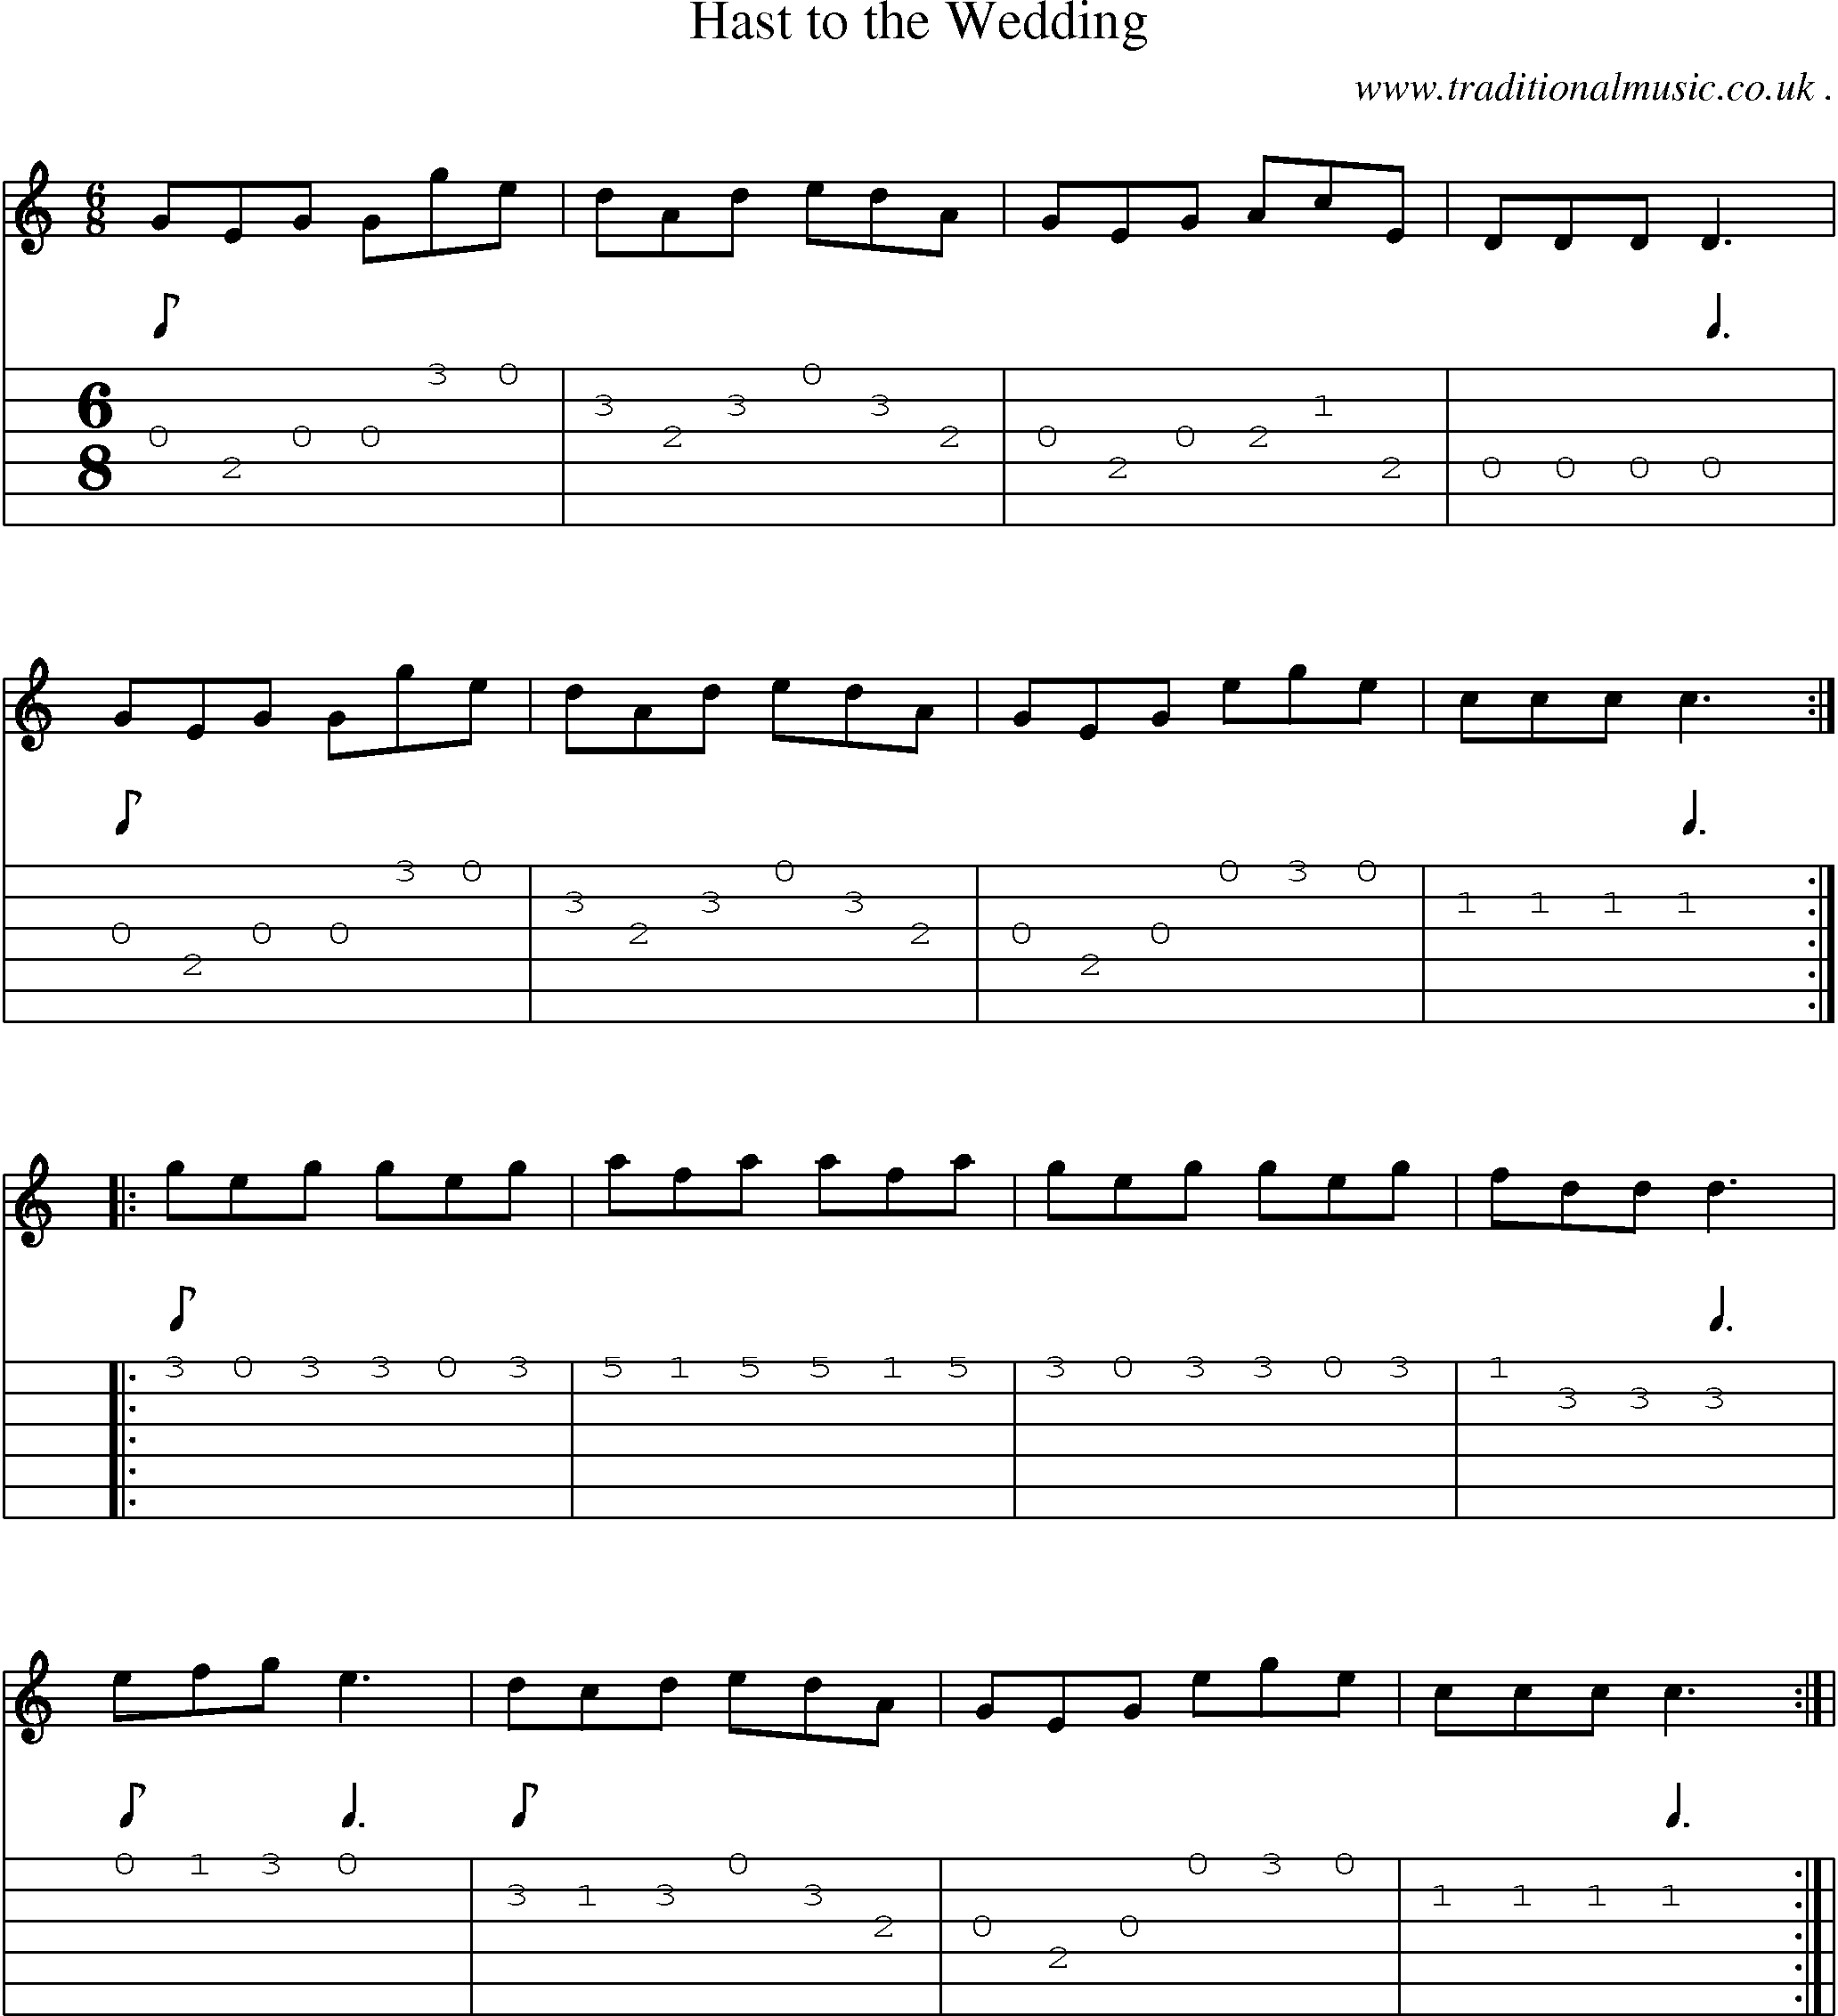 Sheet-Music and Guitar Tabs for Hast To The Wedding